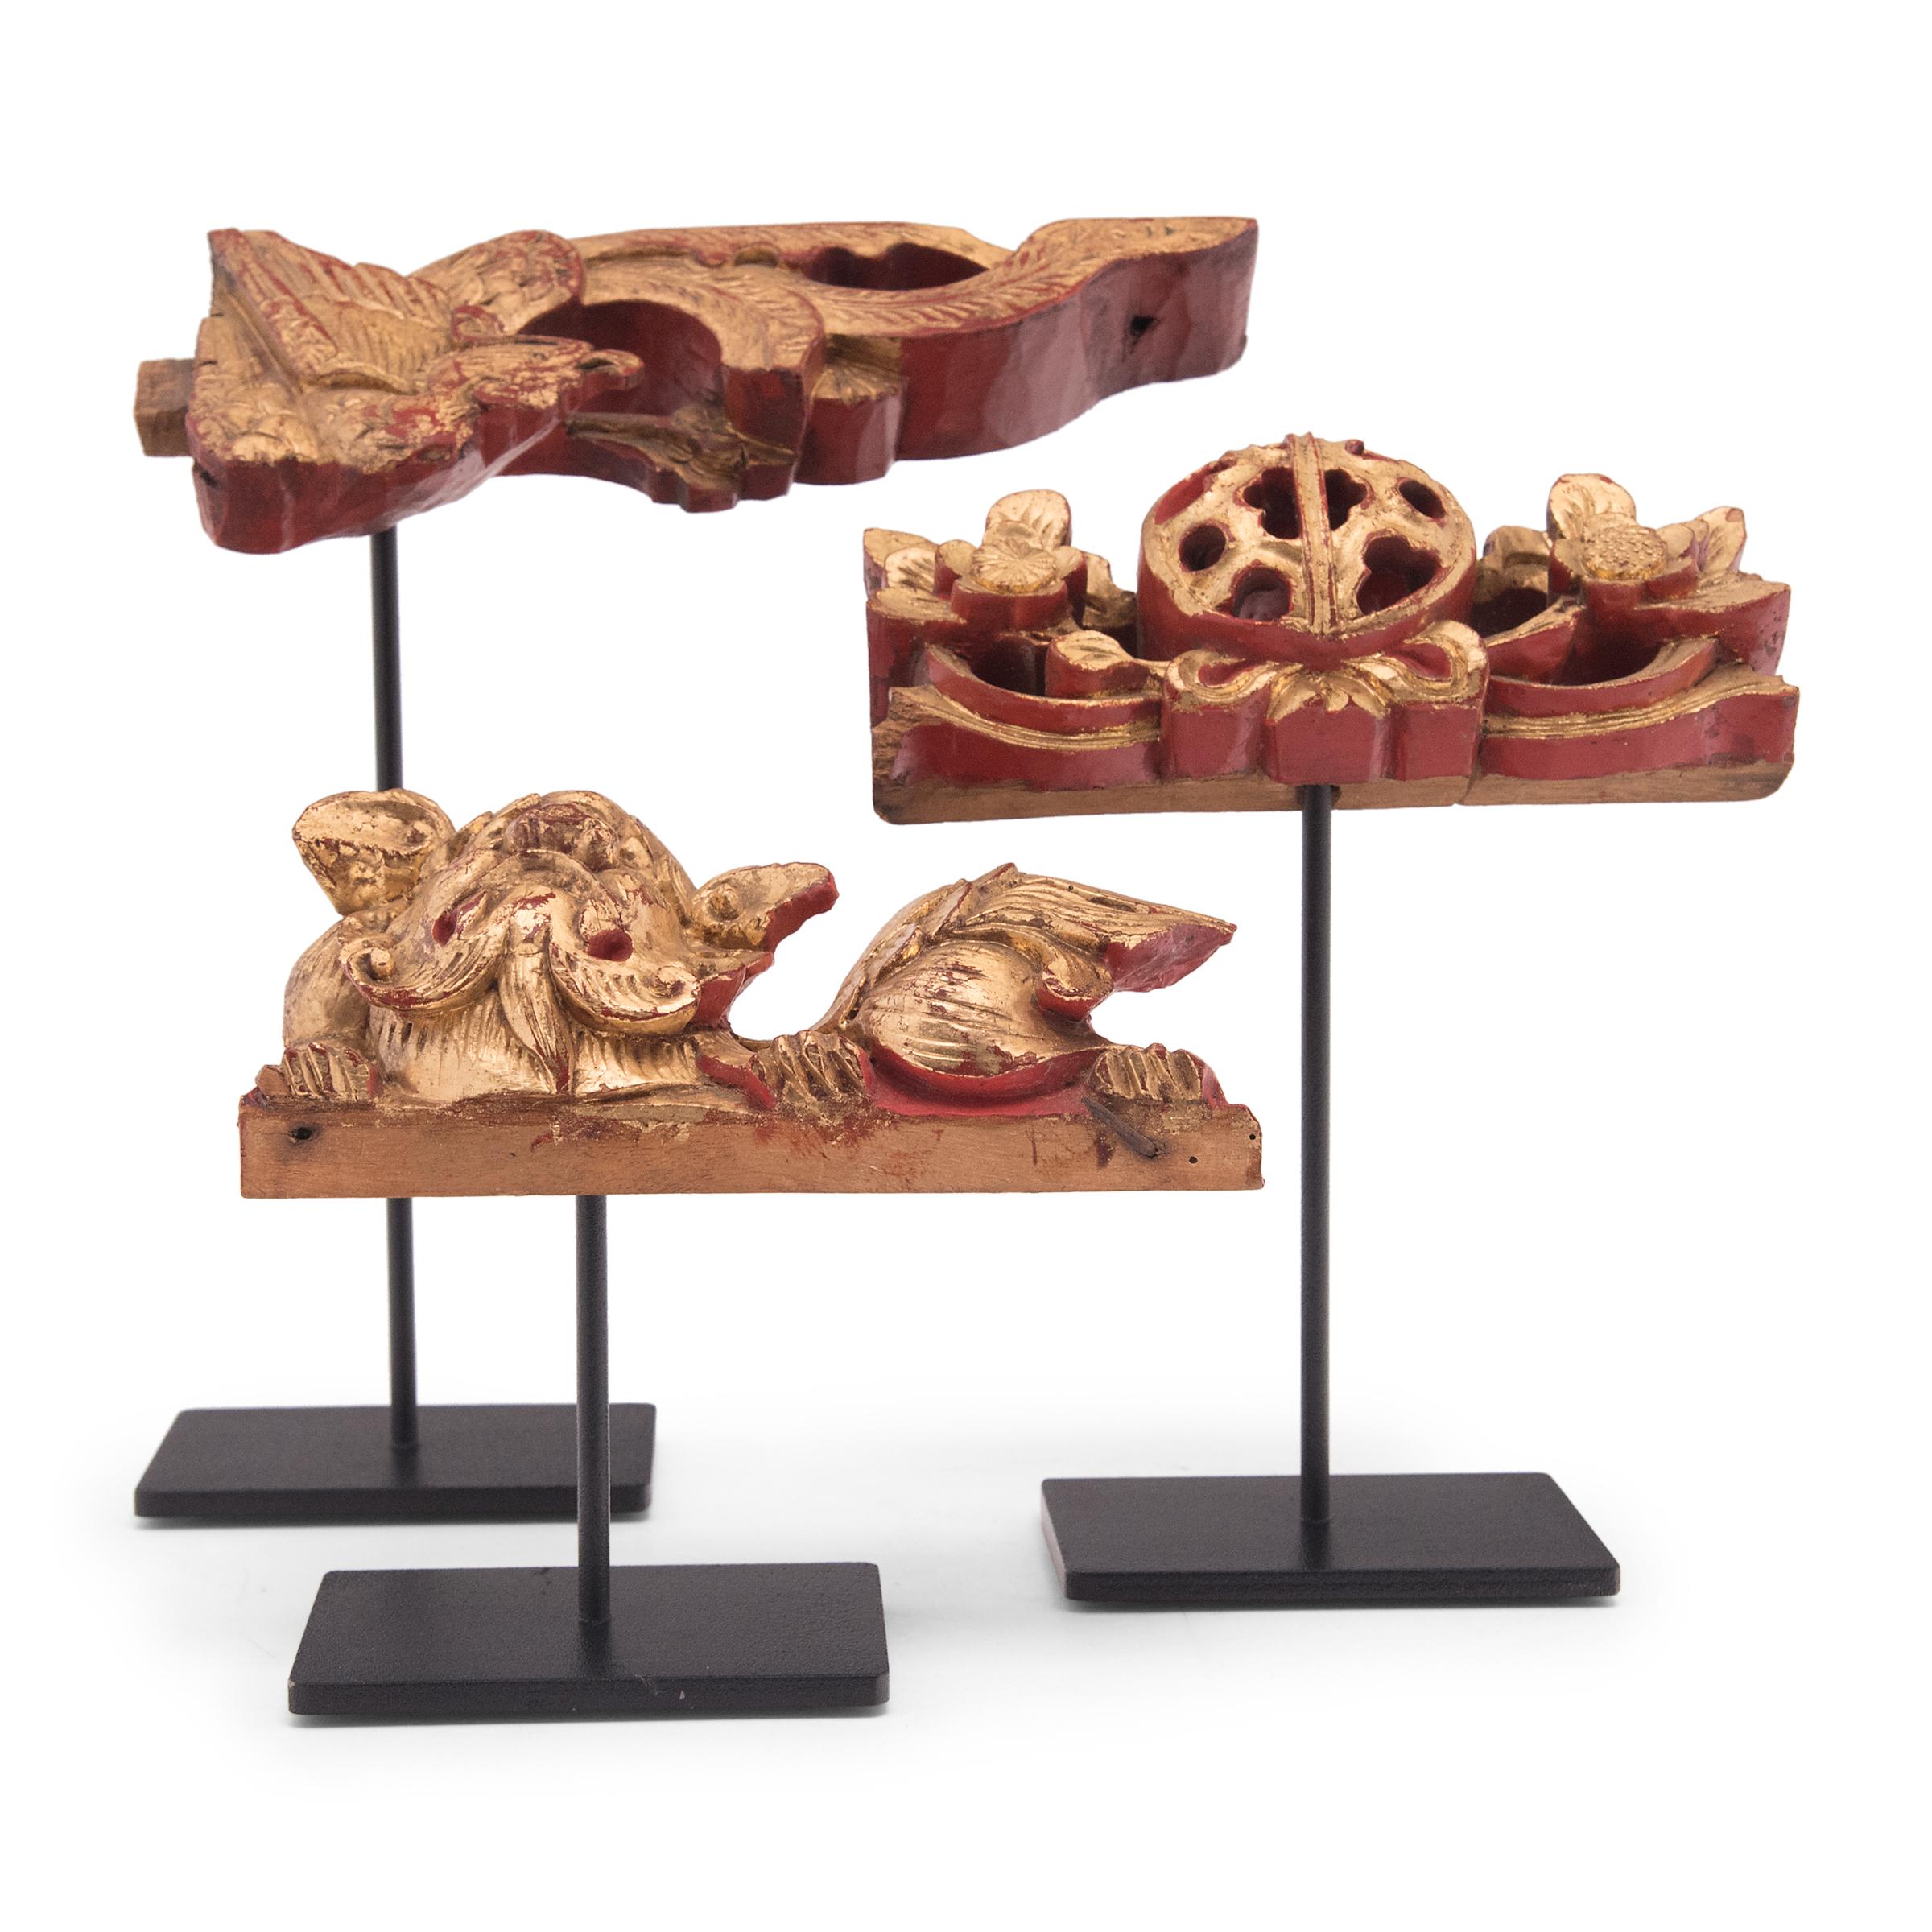 Hand-carved and lavishly pigmented, these gilt fragments originated as decorative elements of ornate Qing-dynasty furniture or architecture. Elevated by custom steel display mounts, each fragment is carved to a different mythical form - a fu dog